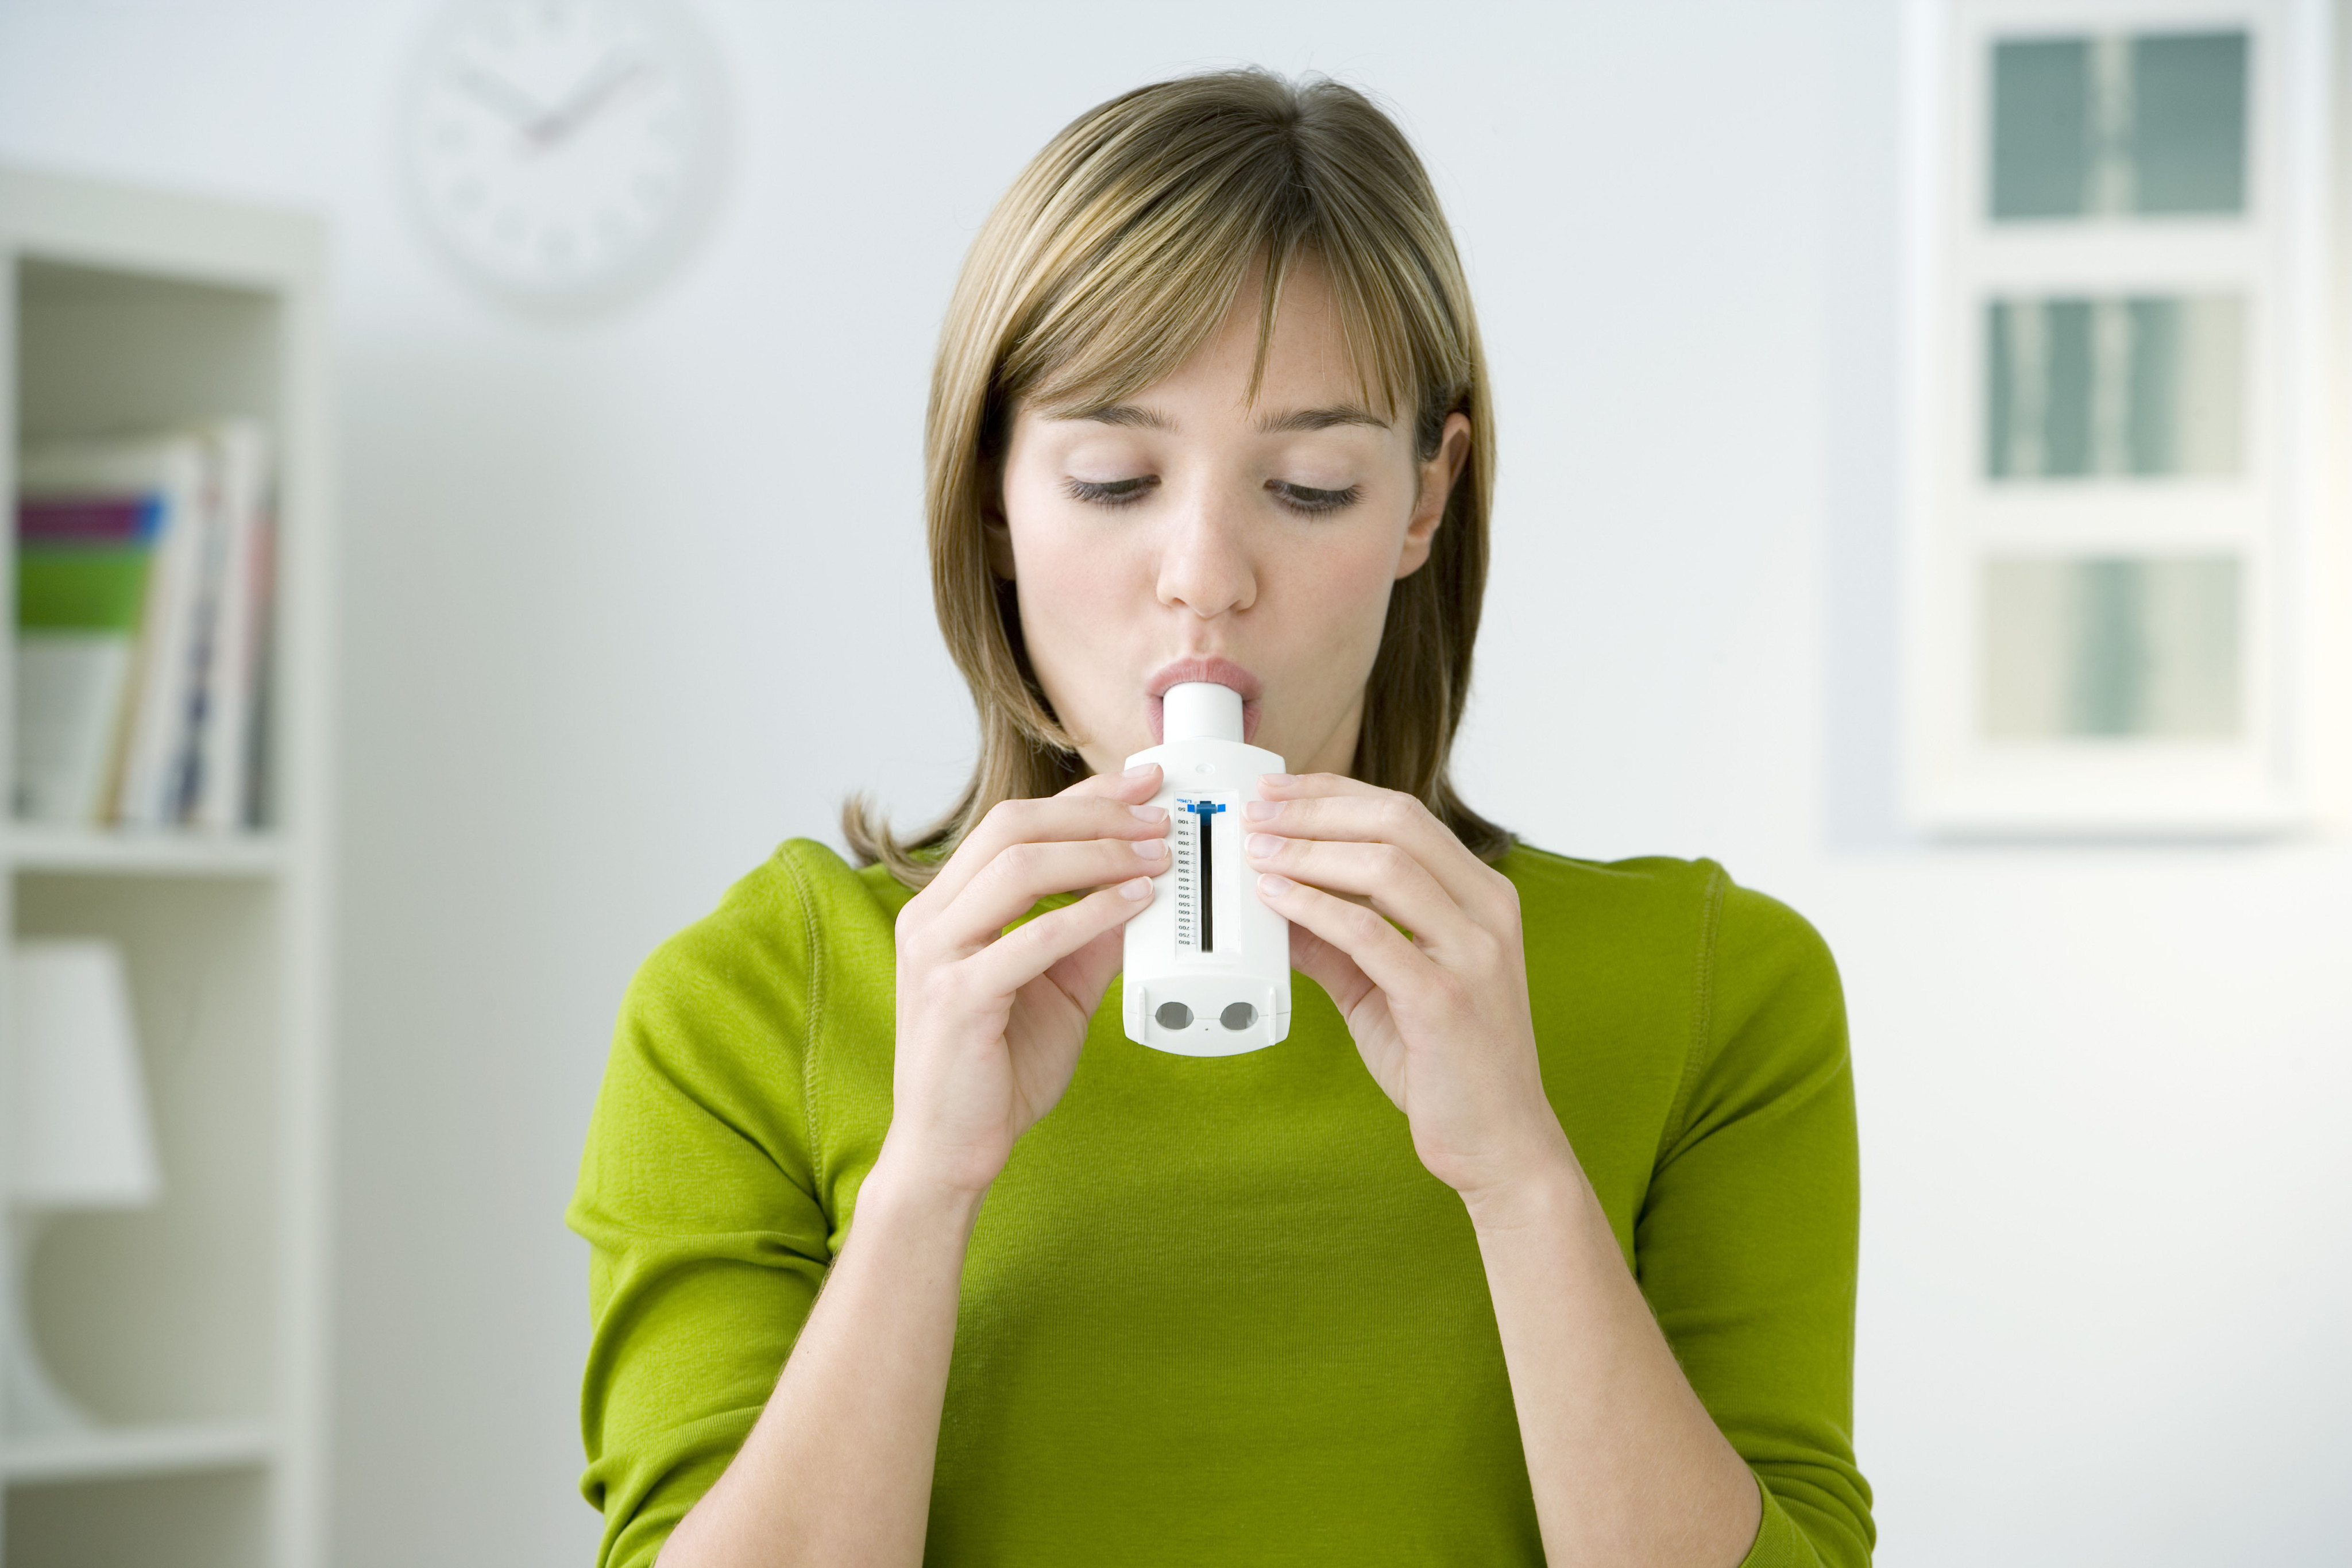 A Woman woman exhales into a device. Vivek Wadhwa, an entrepreneur and academic who is well known in Silicon Valley, has been working on a longshot project to detect cancer in people using only their breath – similar to using a breathalyser.&#xA;&#xA;Credit: Shutterstock